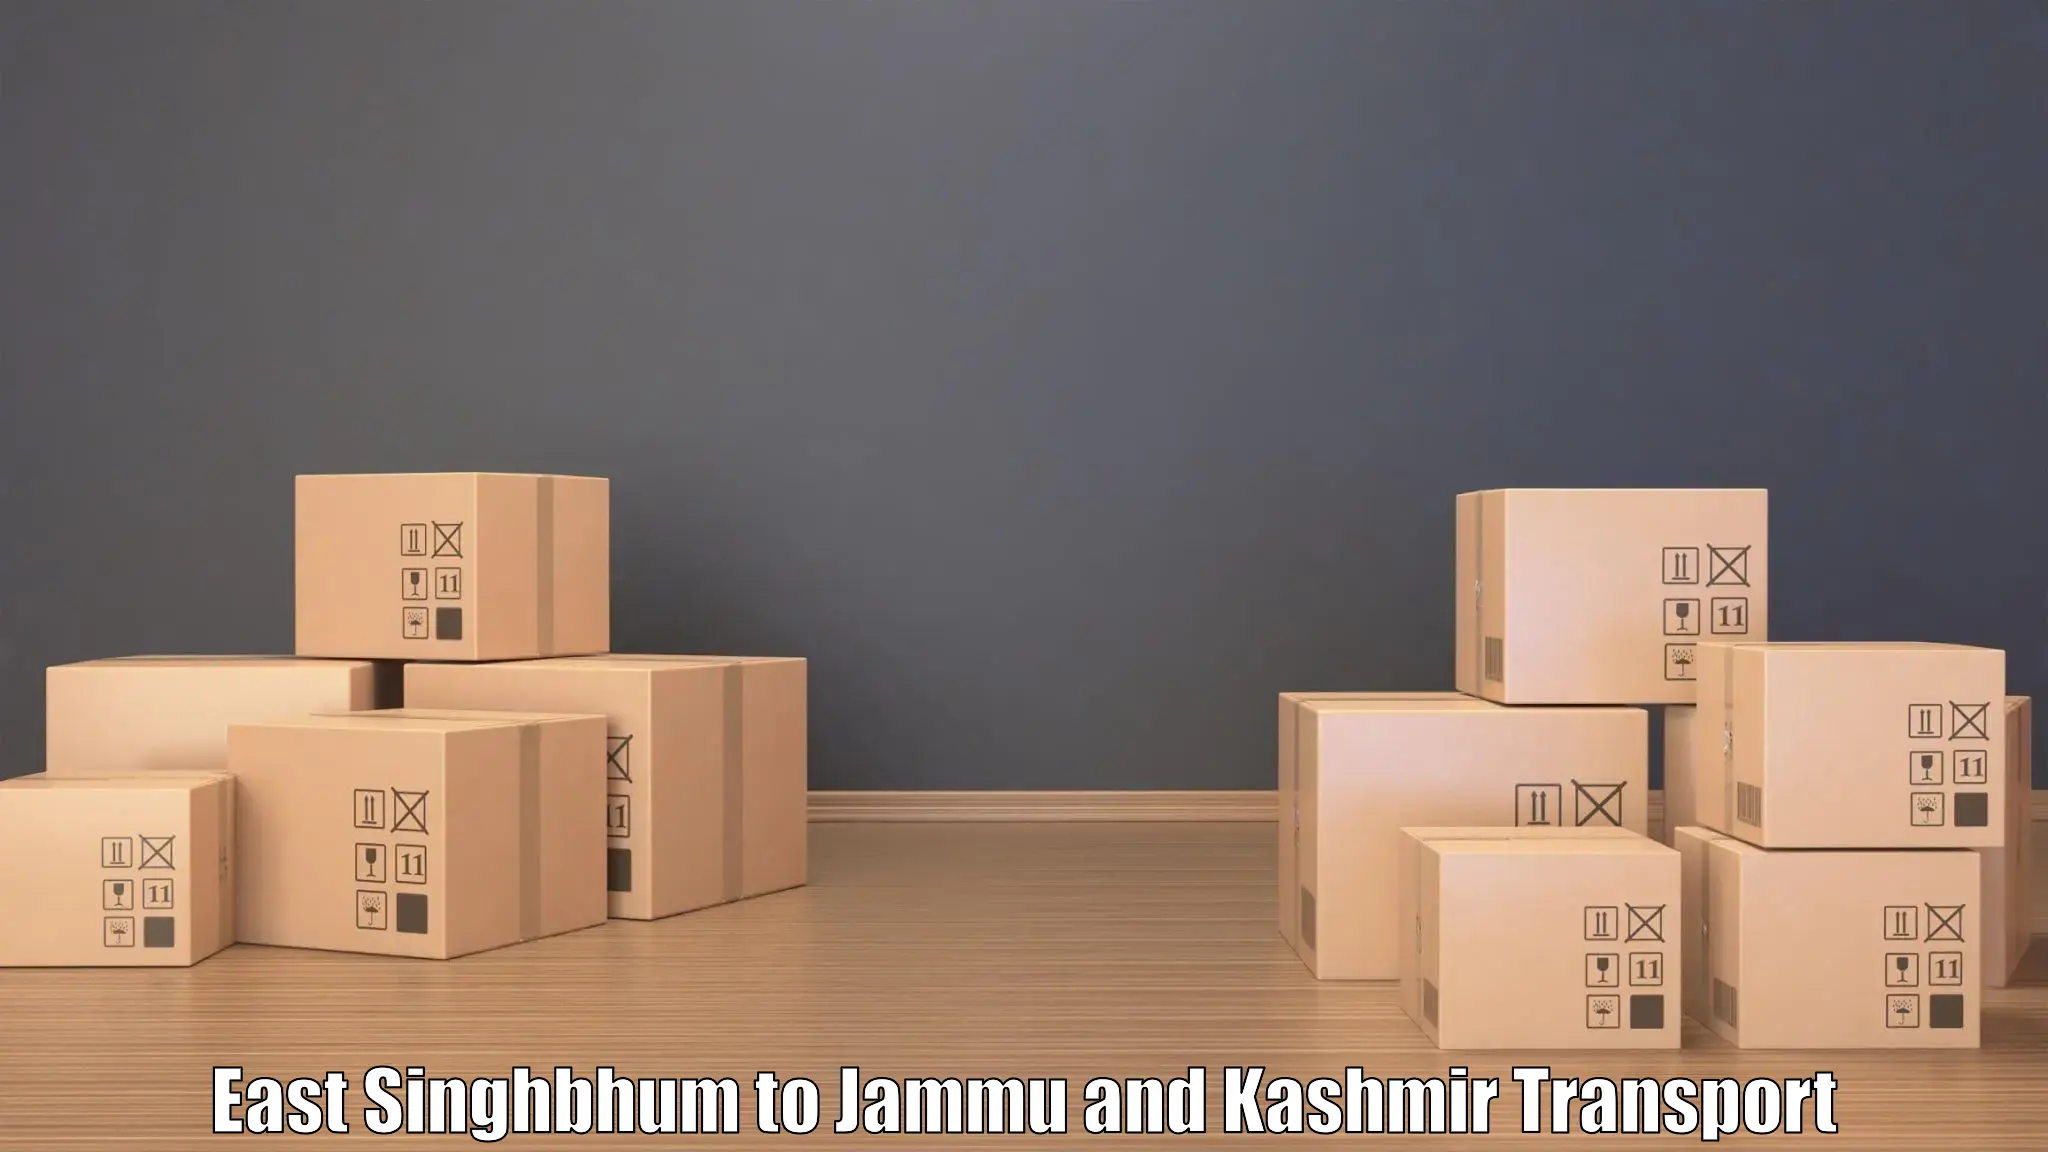 Daily parcel service transport East Singhbhum to Jammu